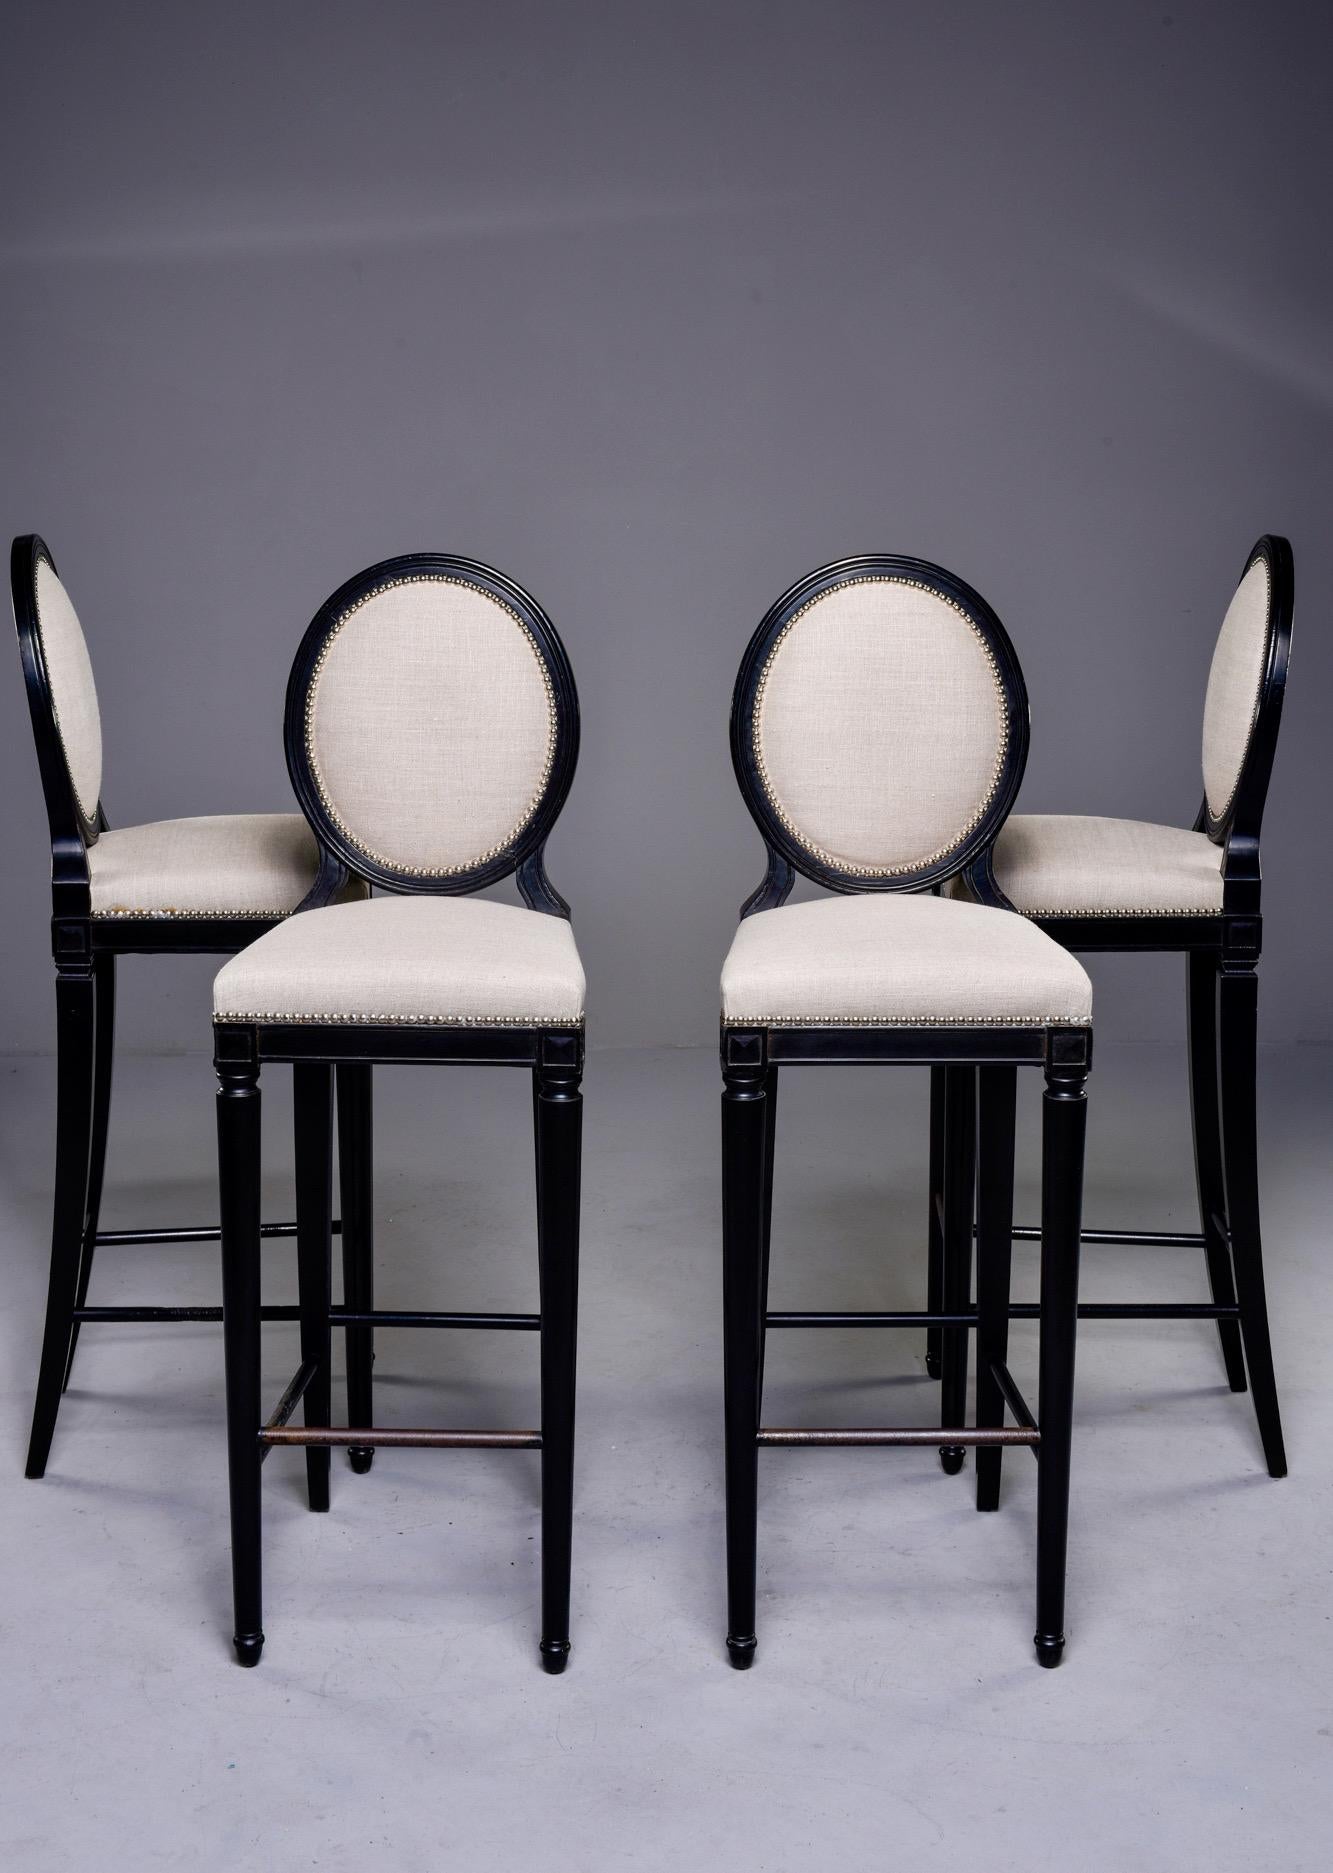 Found in England, this set of four bar height stools feature beech frames in a black finish with classic oval backs. Upholstery is natural colored linen with silver tone nail head trim. There are water spots and some rust marks from nail head tacks